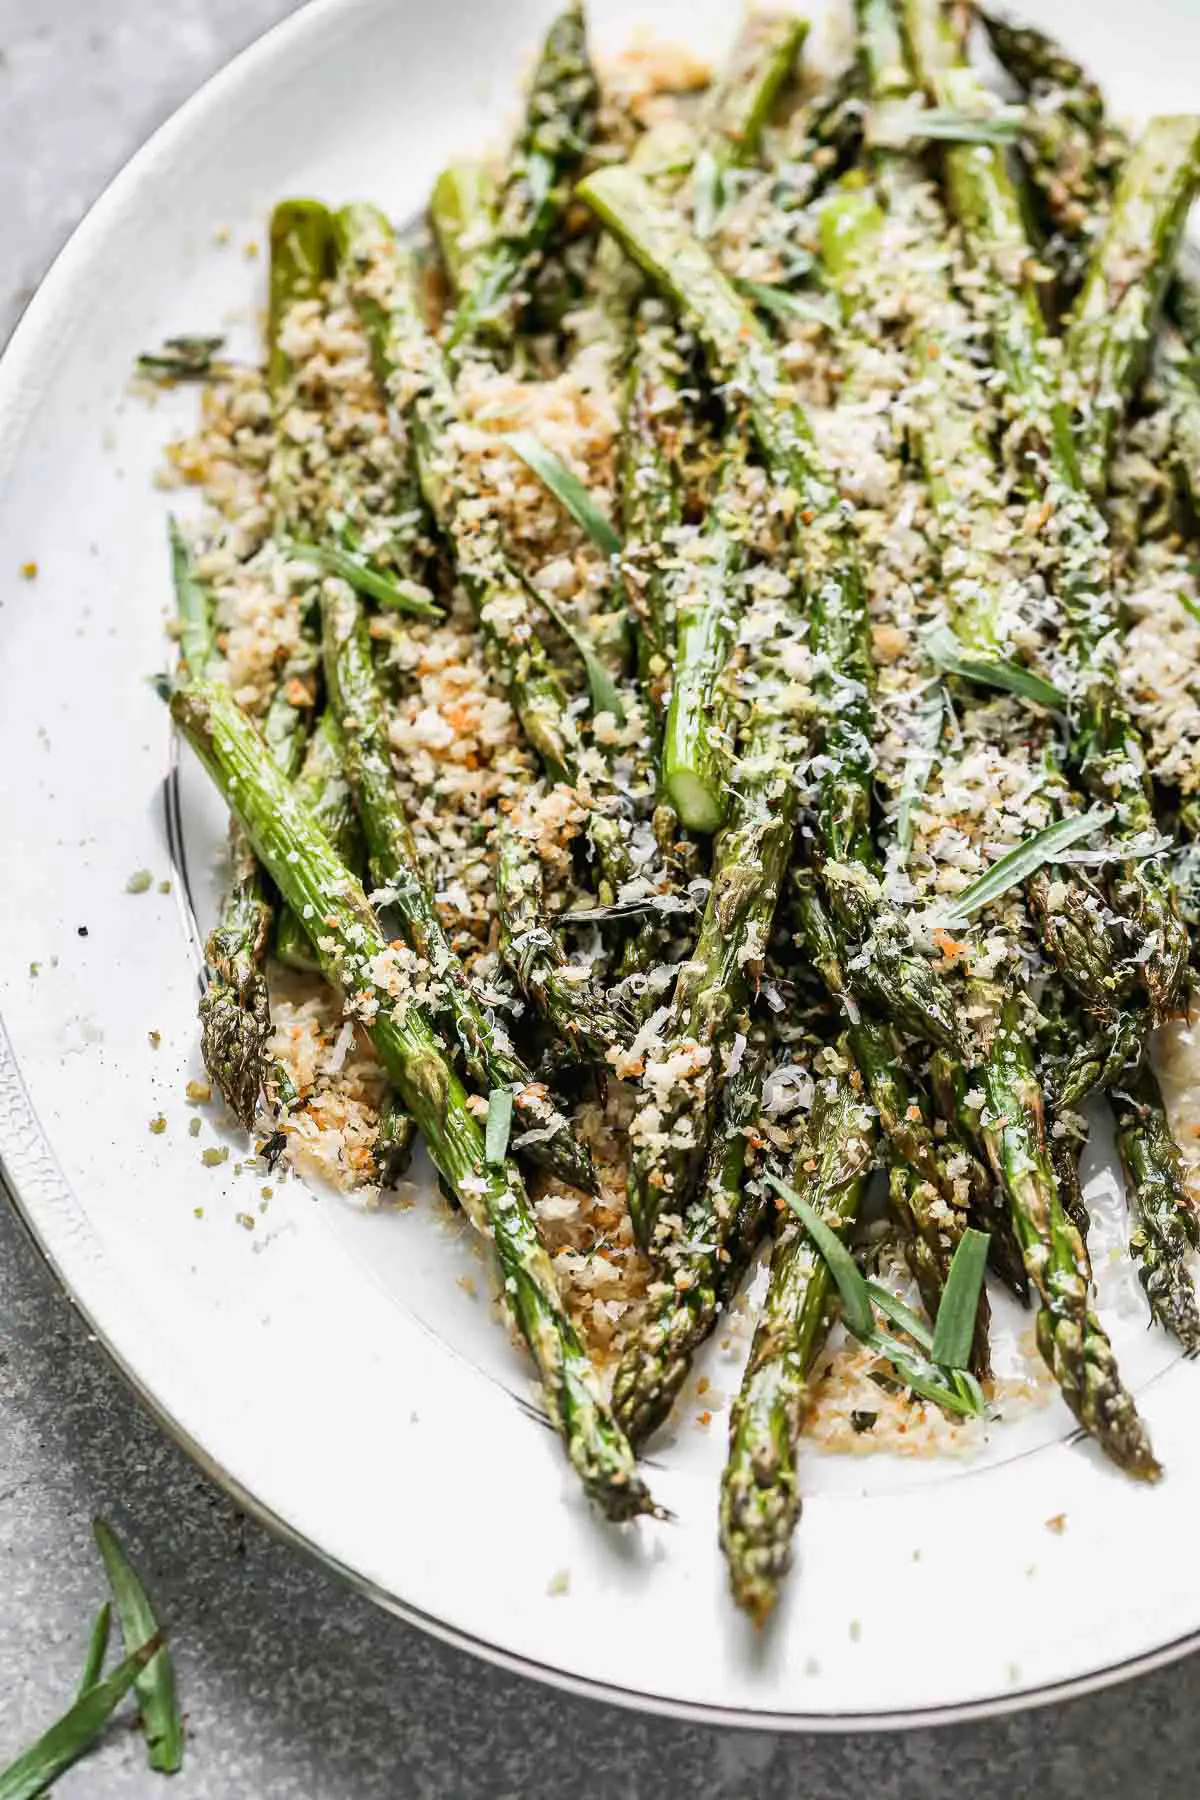 Tender and crispy on the outside with a slight bite on the inside, and covered in cheesy garlicky breadcrumbs (with hints of lemon!), our Easy Roasted Asparagus with Breadcrumbs is the perfect way to up your roasted veggie game this spring. Make a double or triple batch to feed a crowd, or scale it back to feed a family of four.&nbsp;